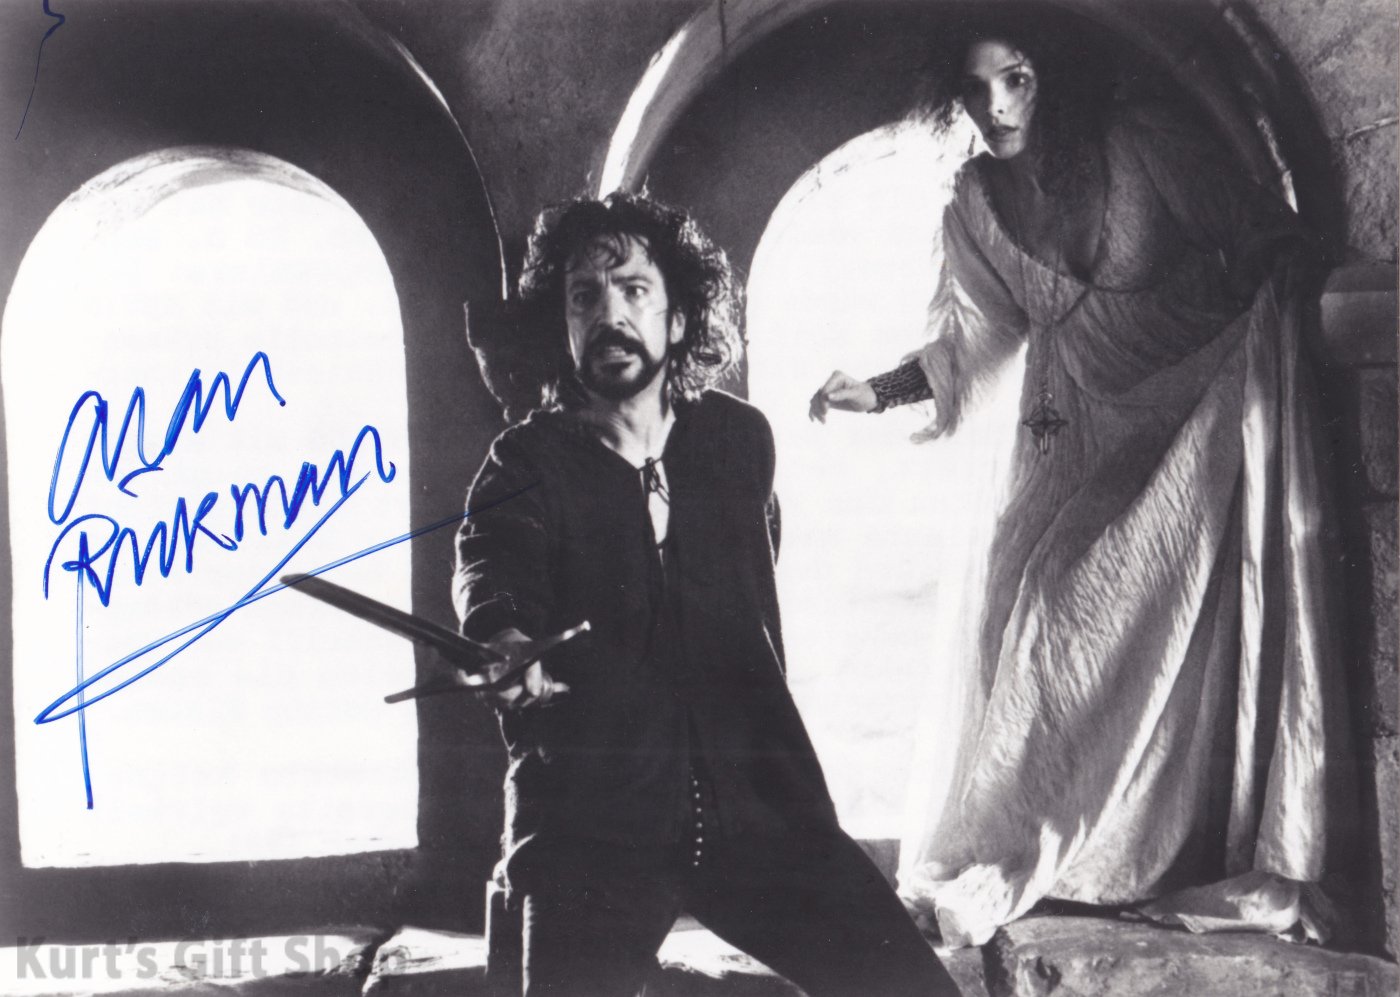 Alan Rickman Robin Hood Men In Tights  8 X 10" Autographed Photo (Great Gift Ideal Reprint #3)